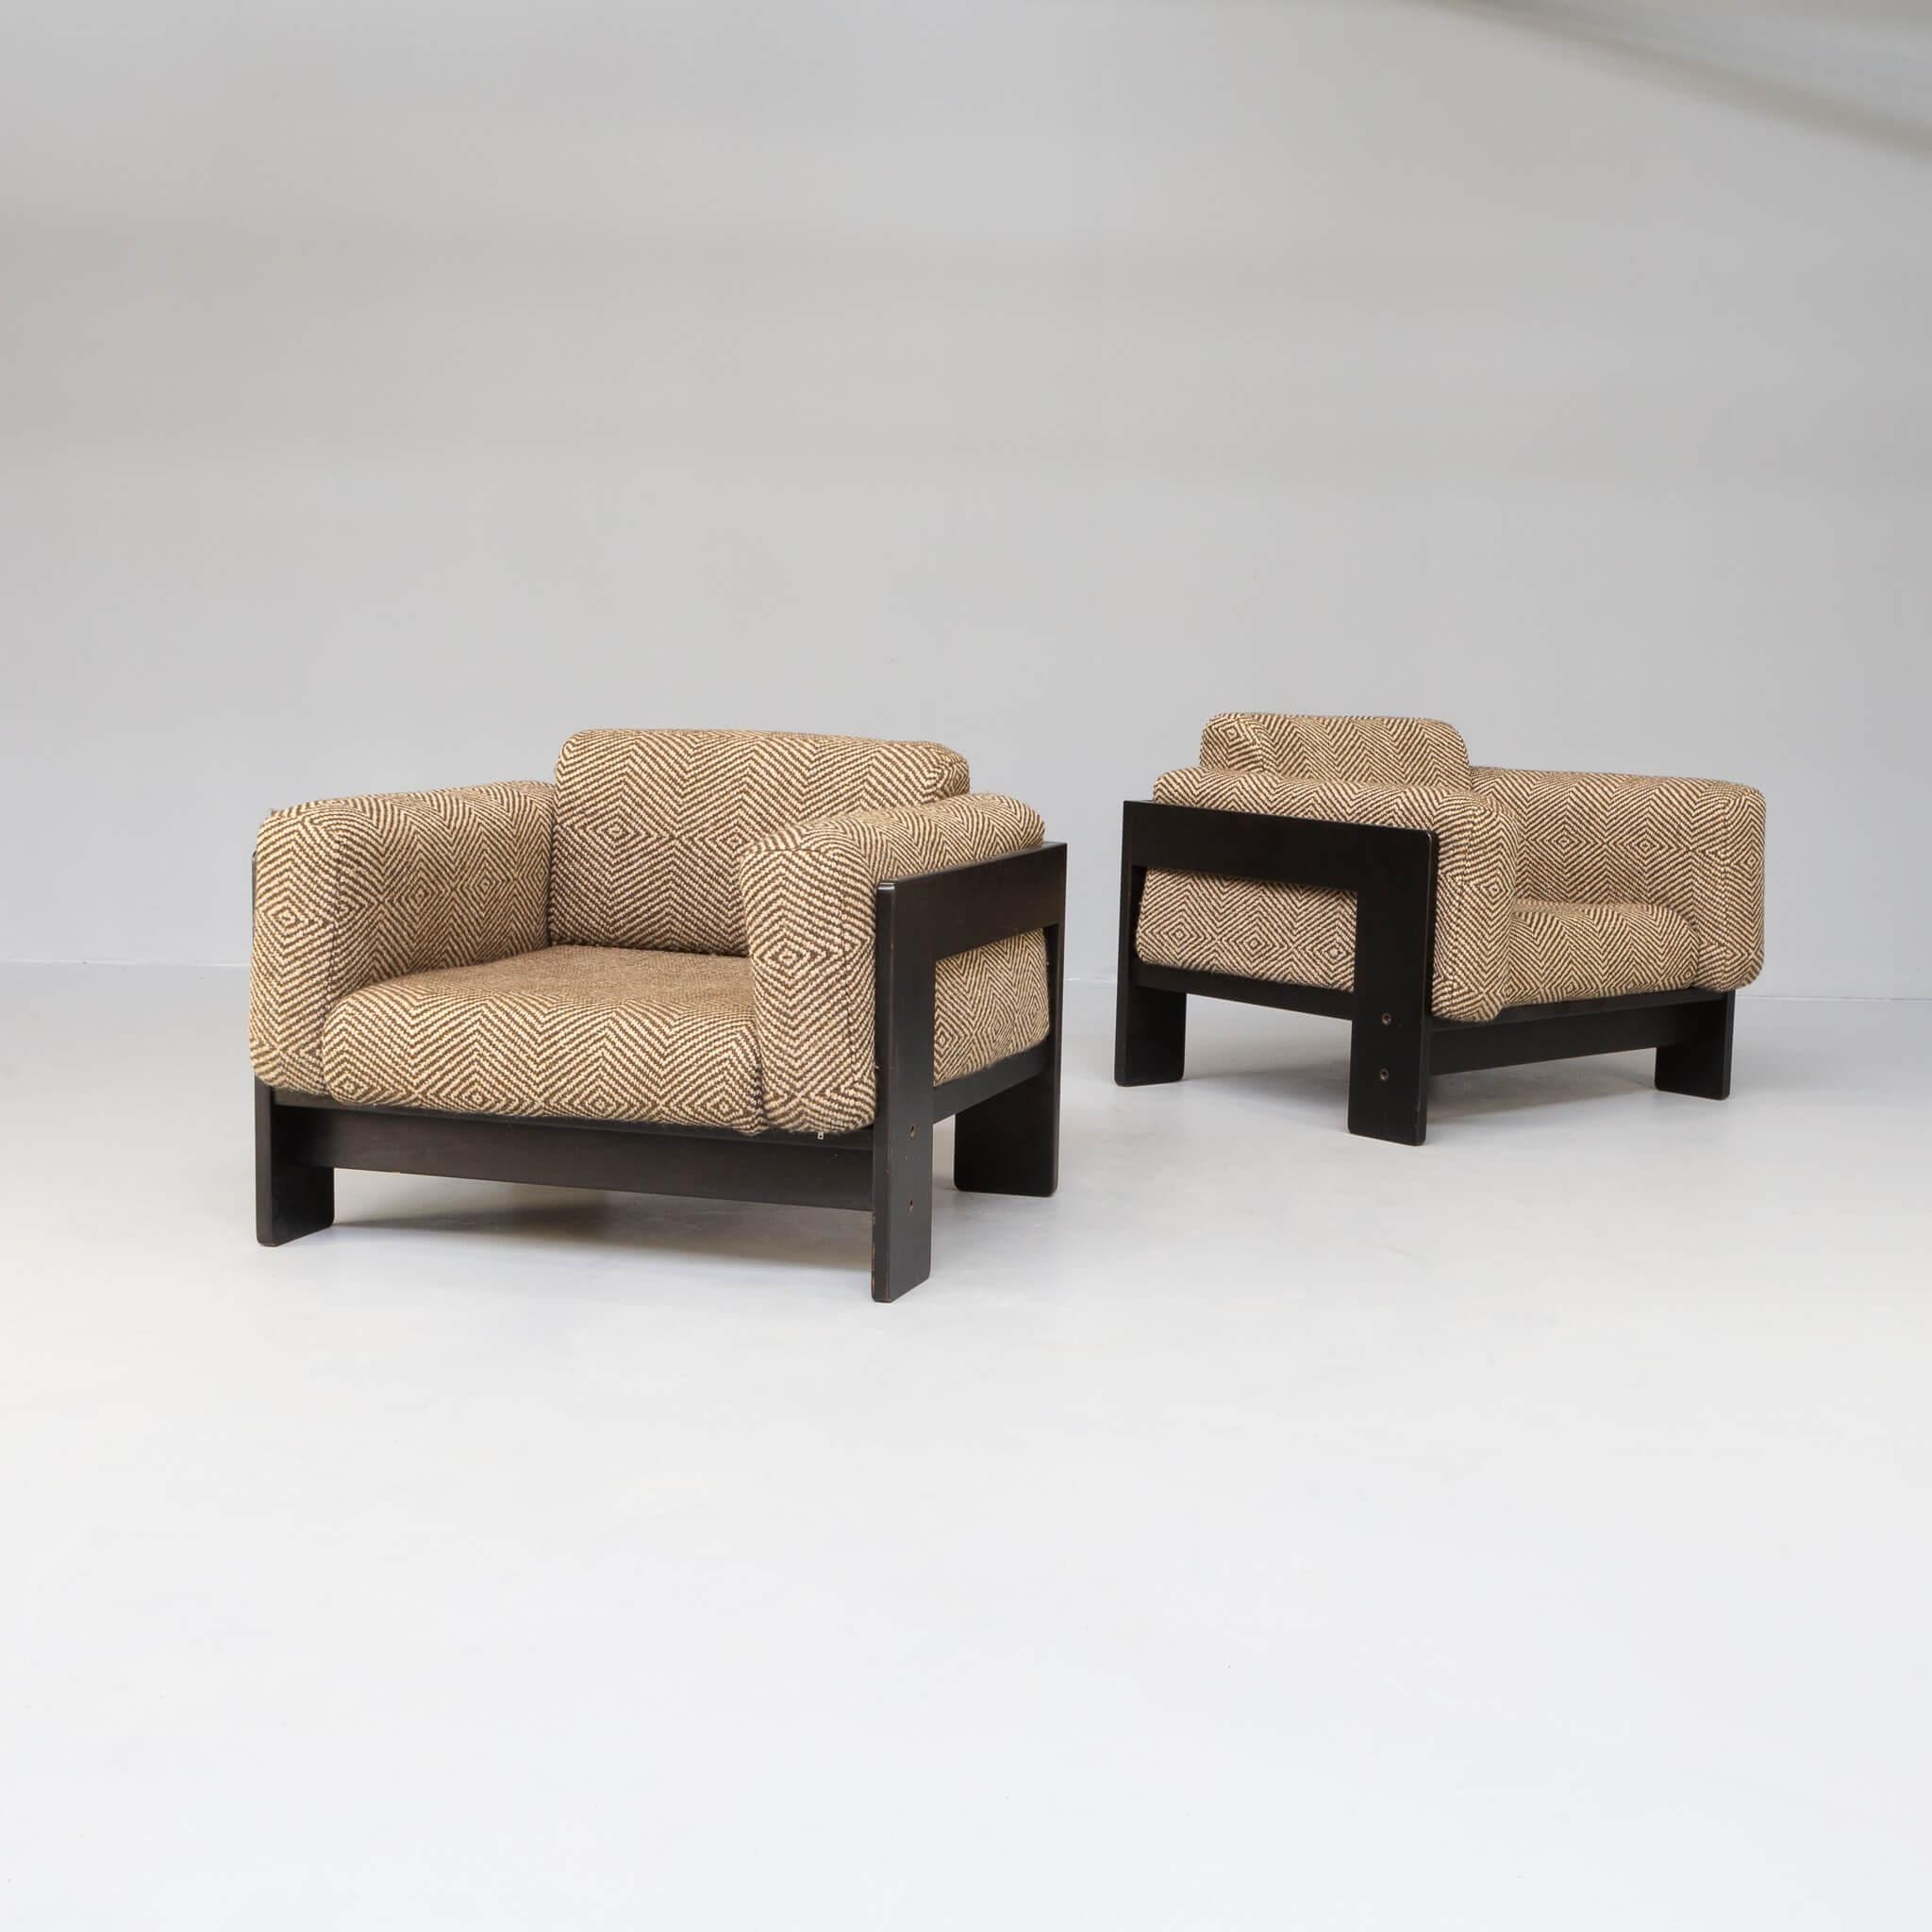 Tobia Scarpa designed the Bastiano series for the experimental design laboratory of Gavina in 1960. About the result Gavina said it “exploited Le Corbusier’s idea of free cushions in order to make a modern sofa” this time in wood. The sofa was the